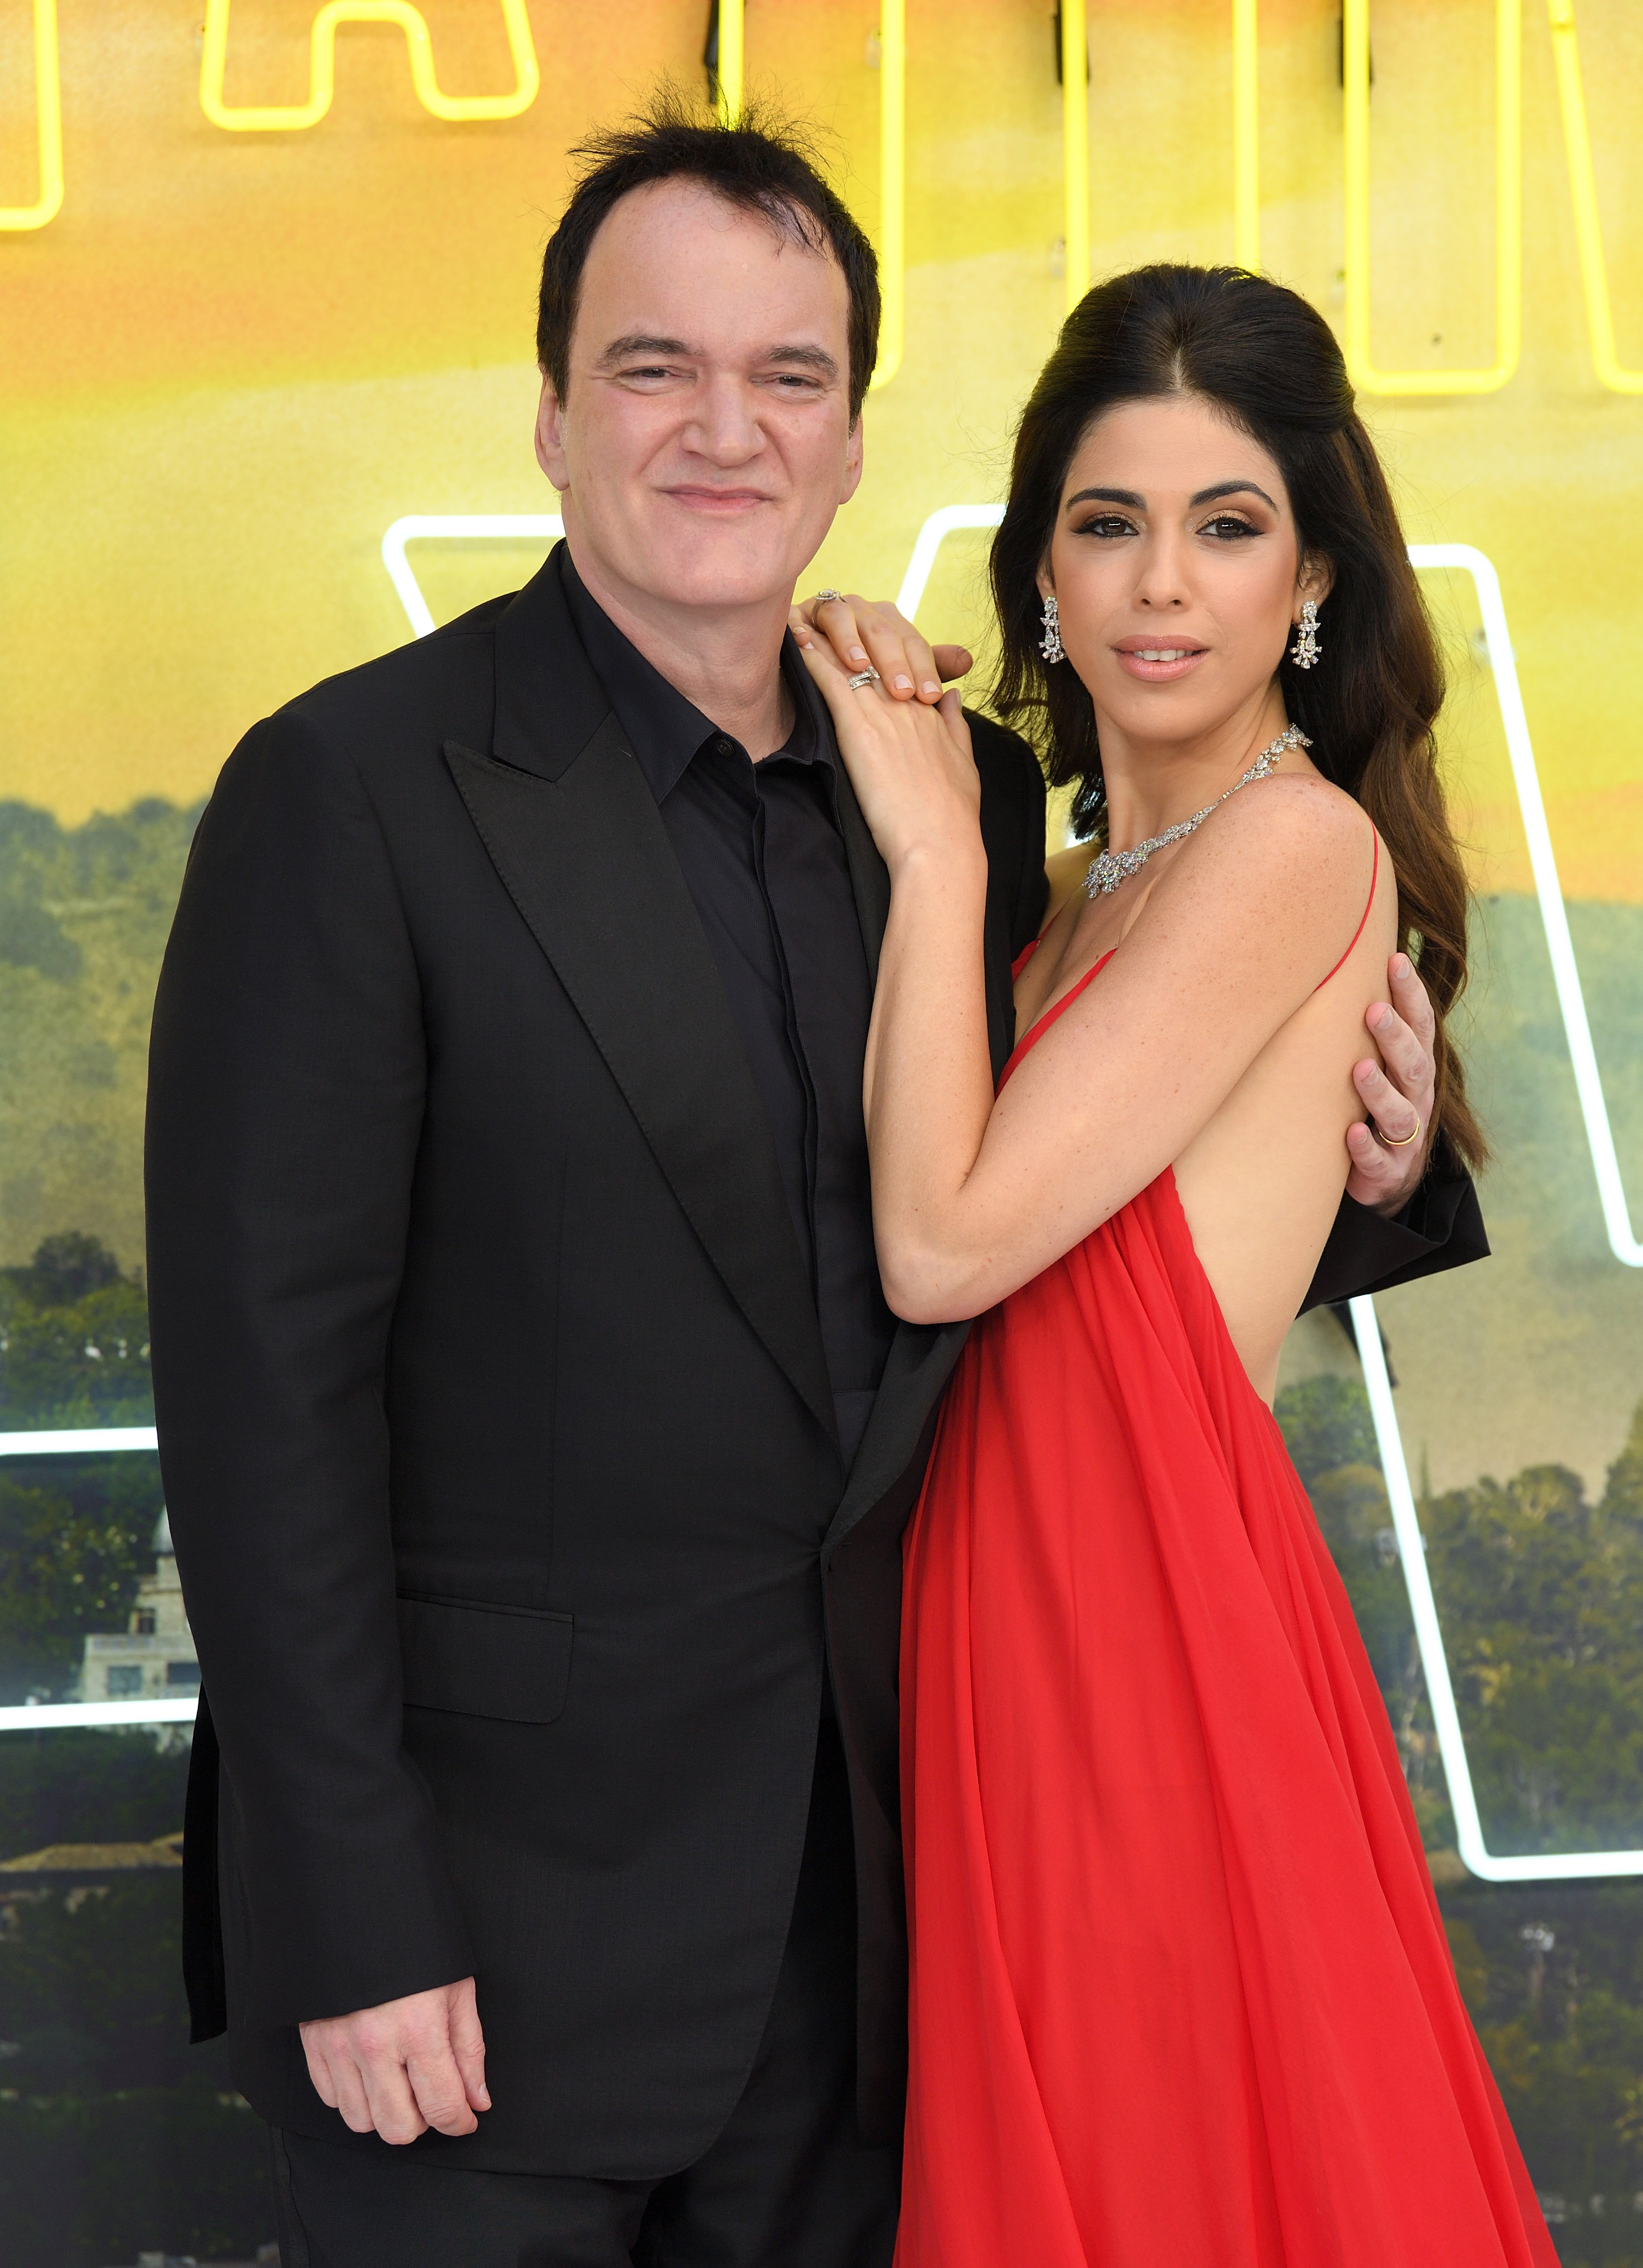 Quentin Tarantino and Daniella Pick at the "Once Upon a Time... in Hollywood" UK Premiere at Odeon Luxe Leicester Square in London, England | Photo: Karwai Tang/WireImage